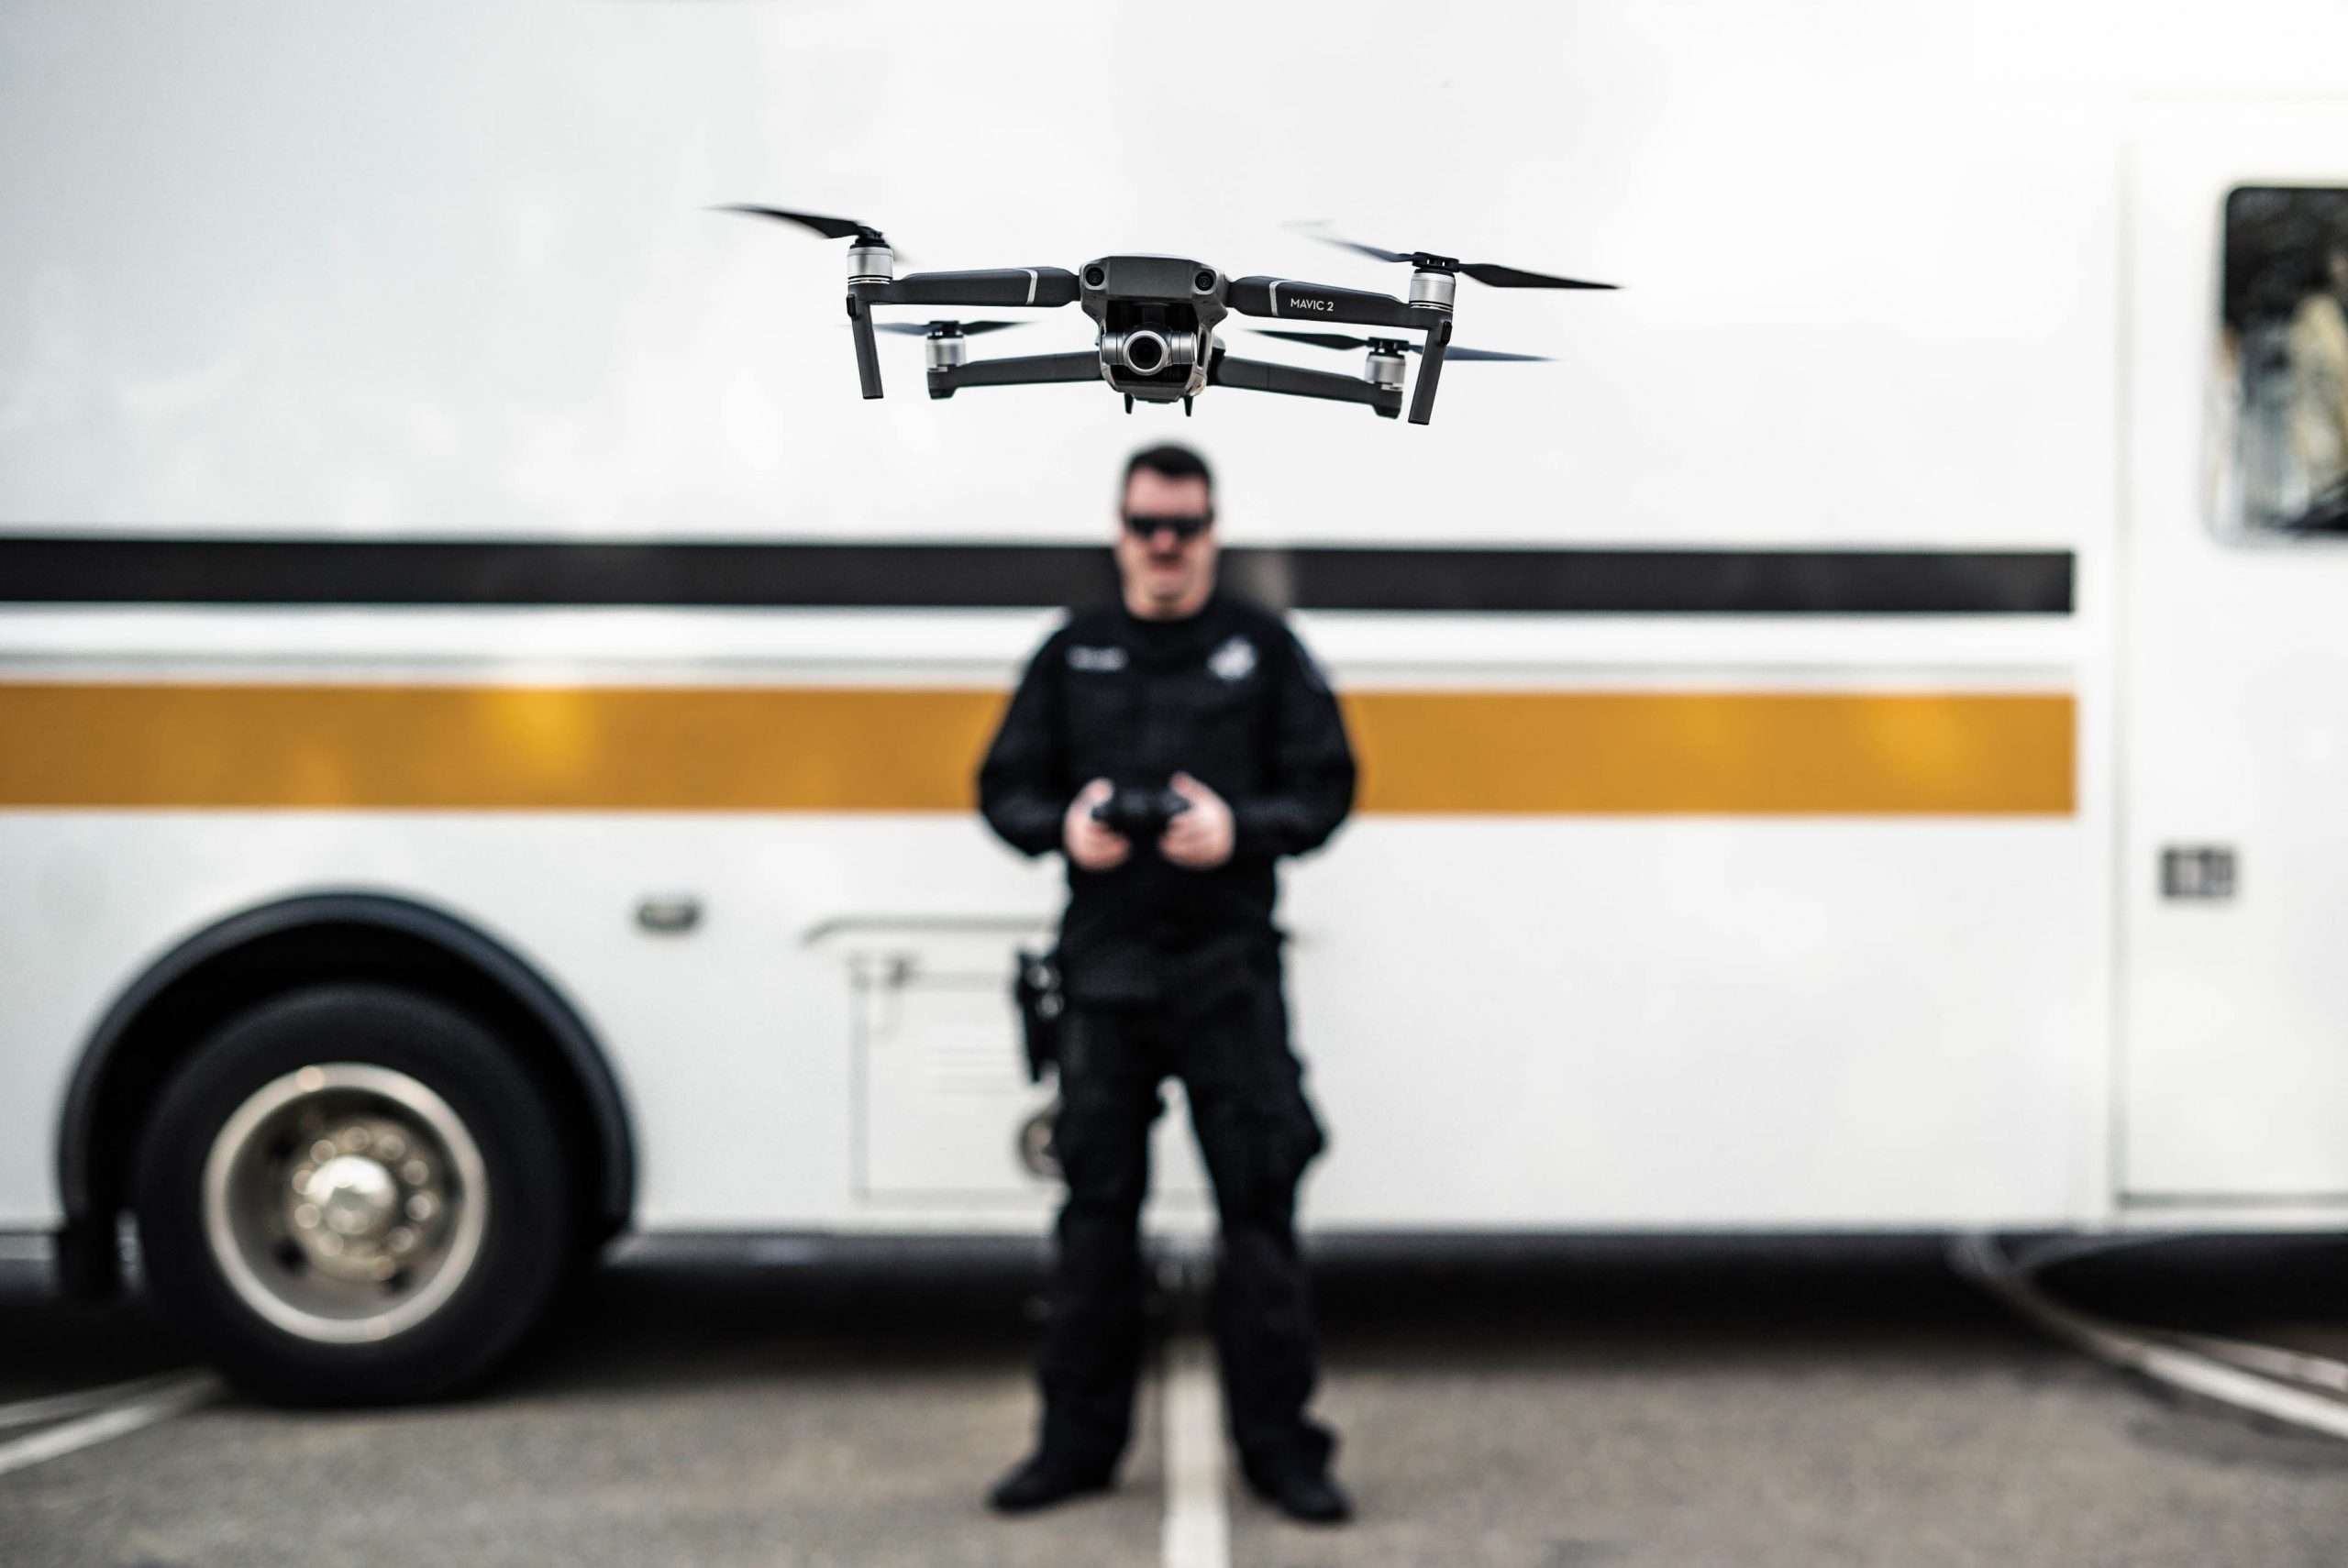 A police drone operator flies a drone in front of the camera